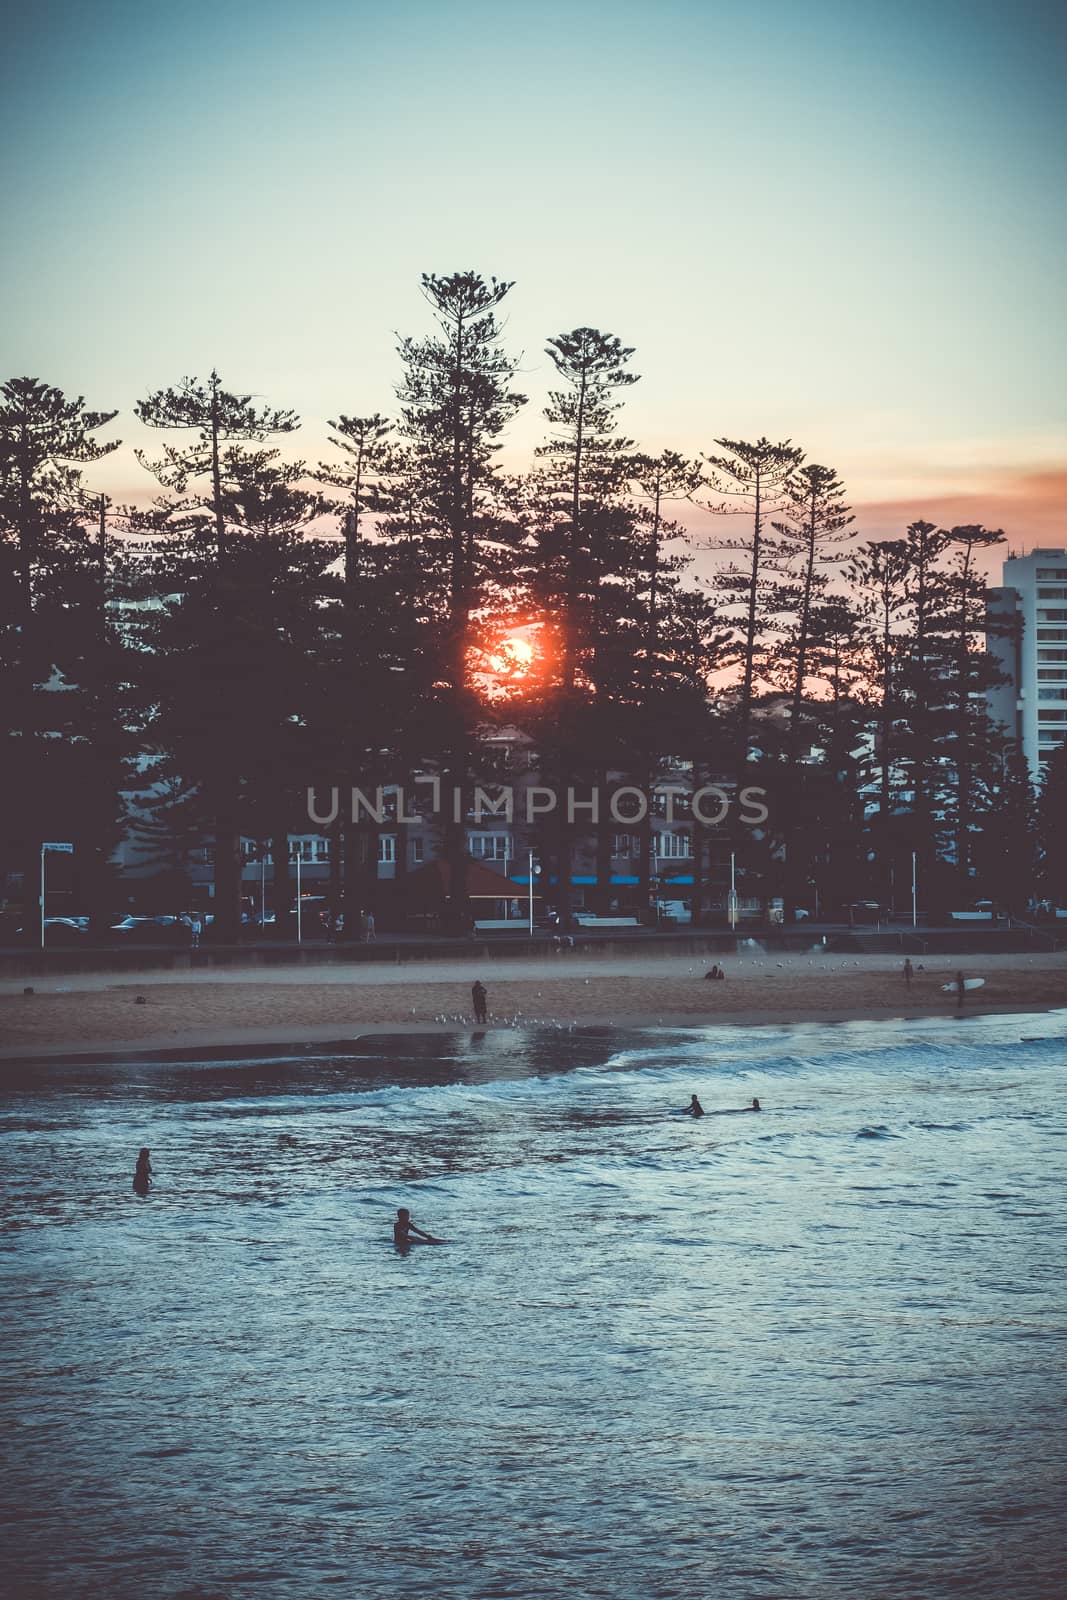 Manly Beach at sunset, Sydney, Australia by daboost